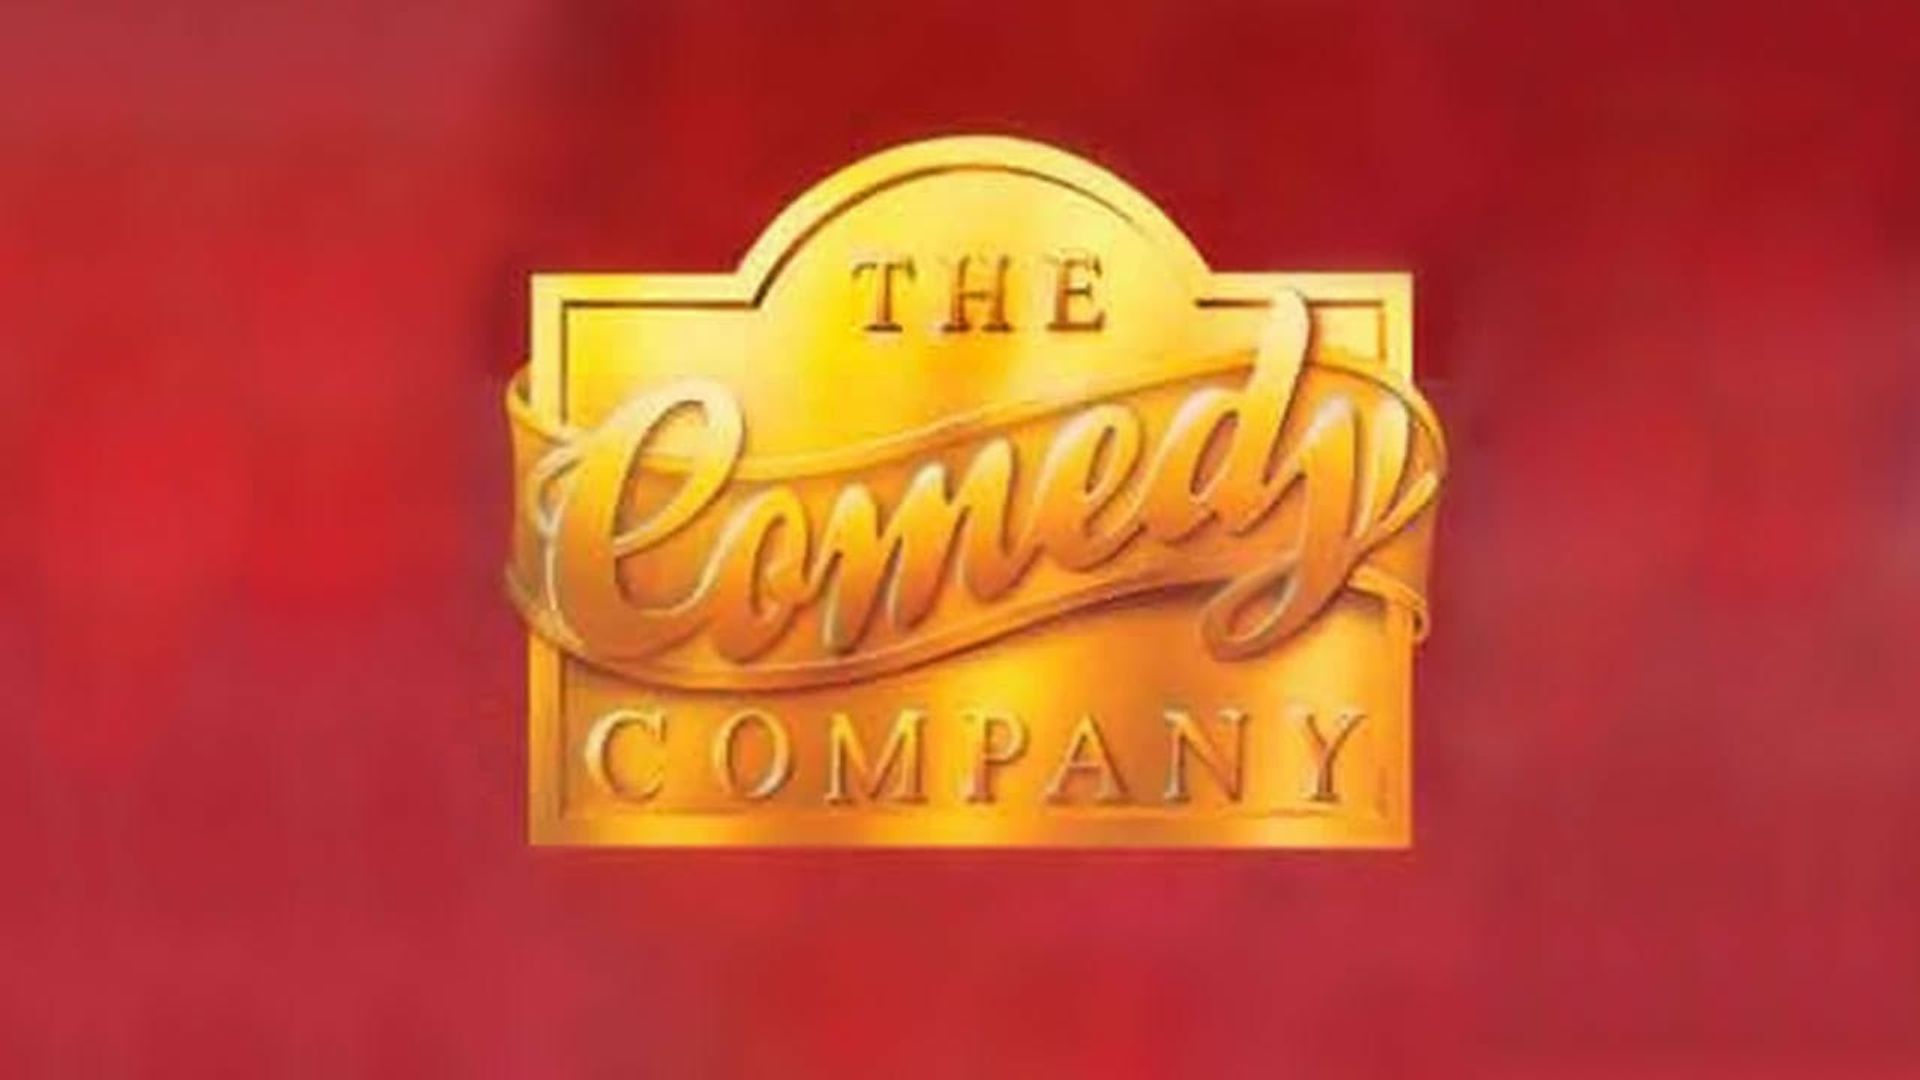 The Comedy Company background